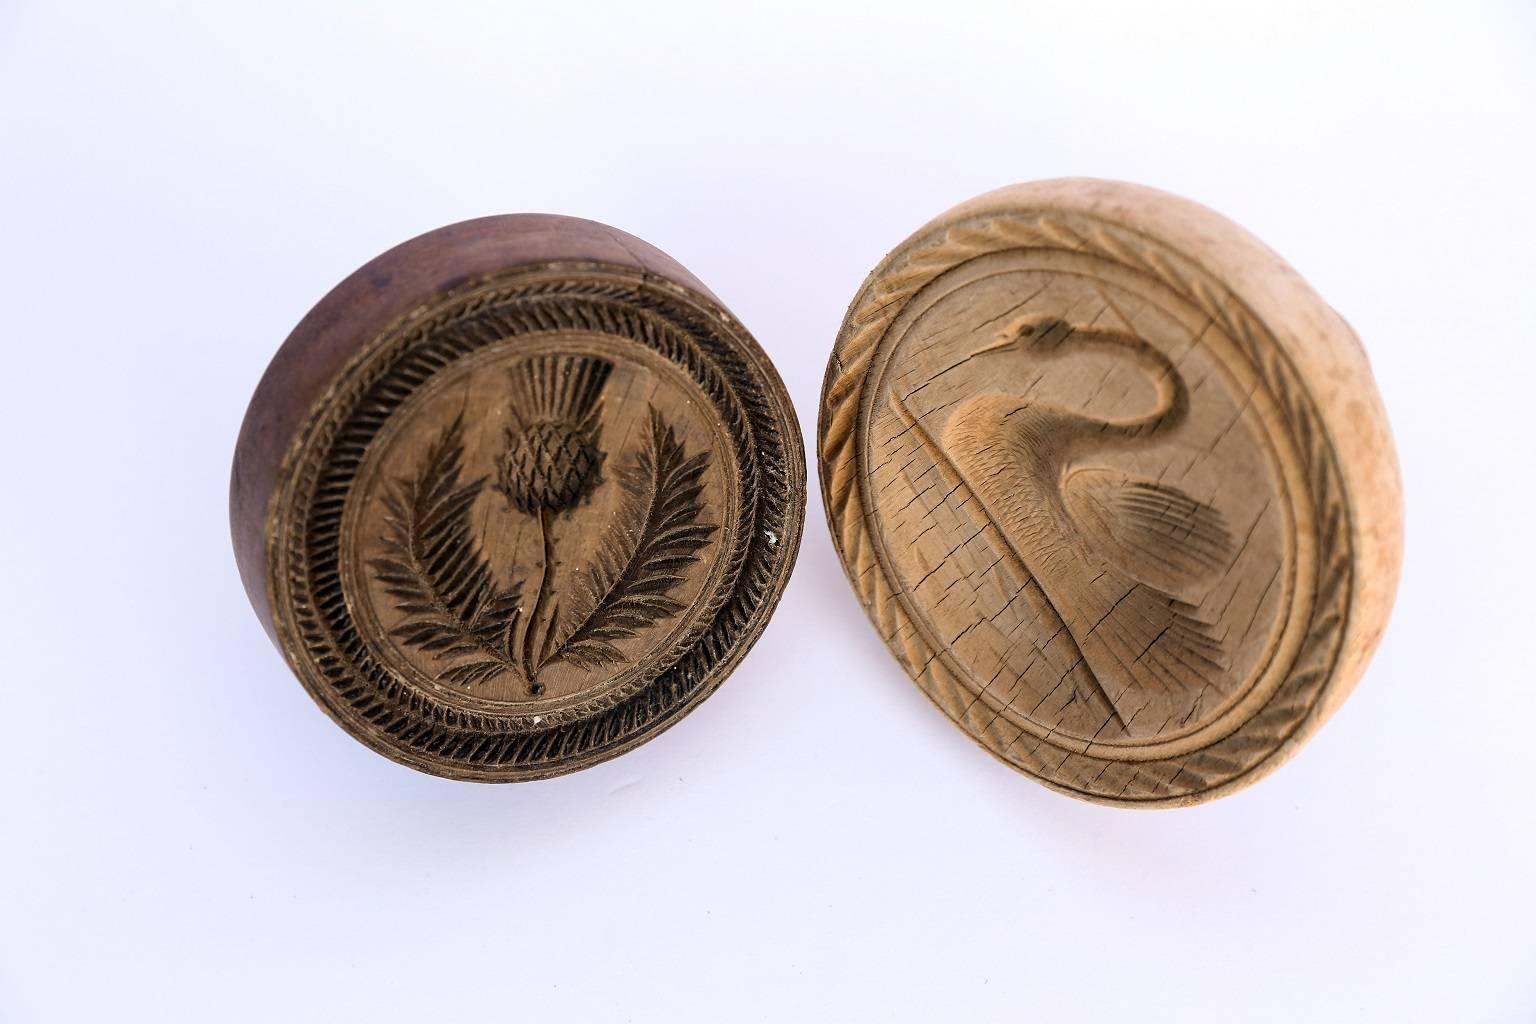 Two Welsh butter prints: 19th century lathe-turned sycamore, hand-carved stamps. The carved swan motif print measures 3.75 inches high by 4.5 inches diameter and the carved flower motif print measures 2.75 inches high x 4 inches diameter. Genuine